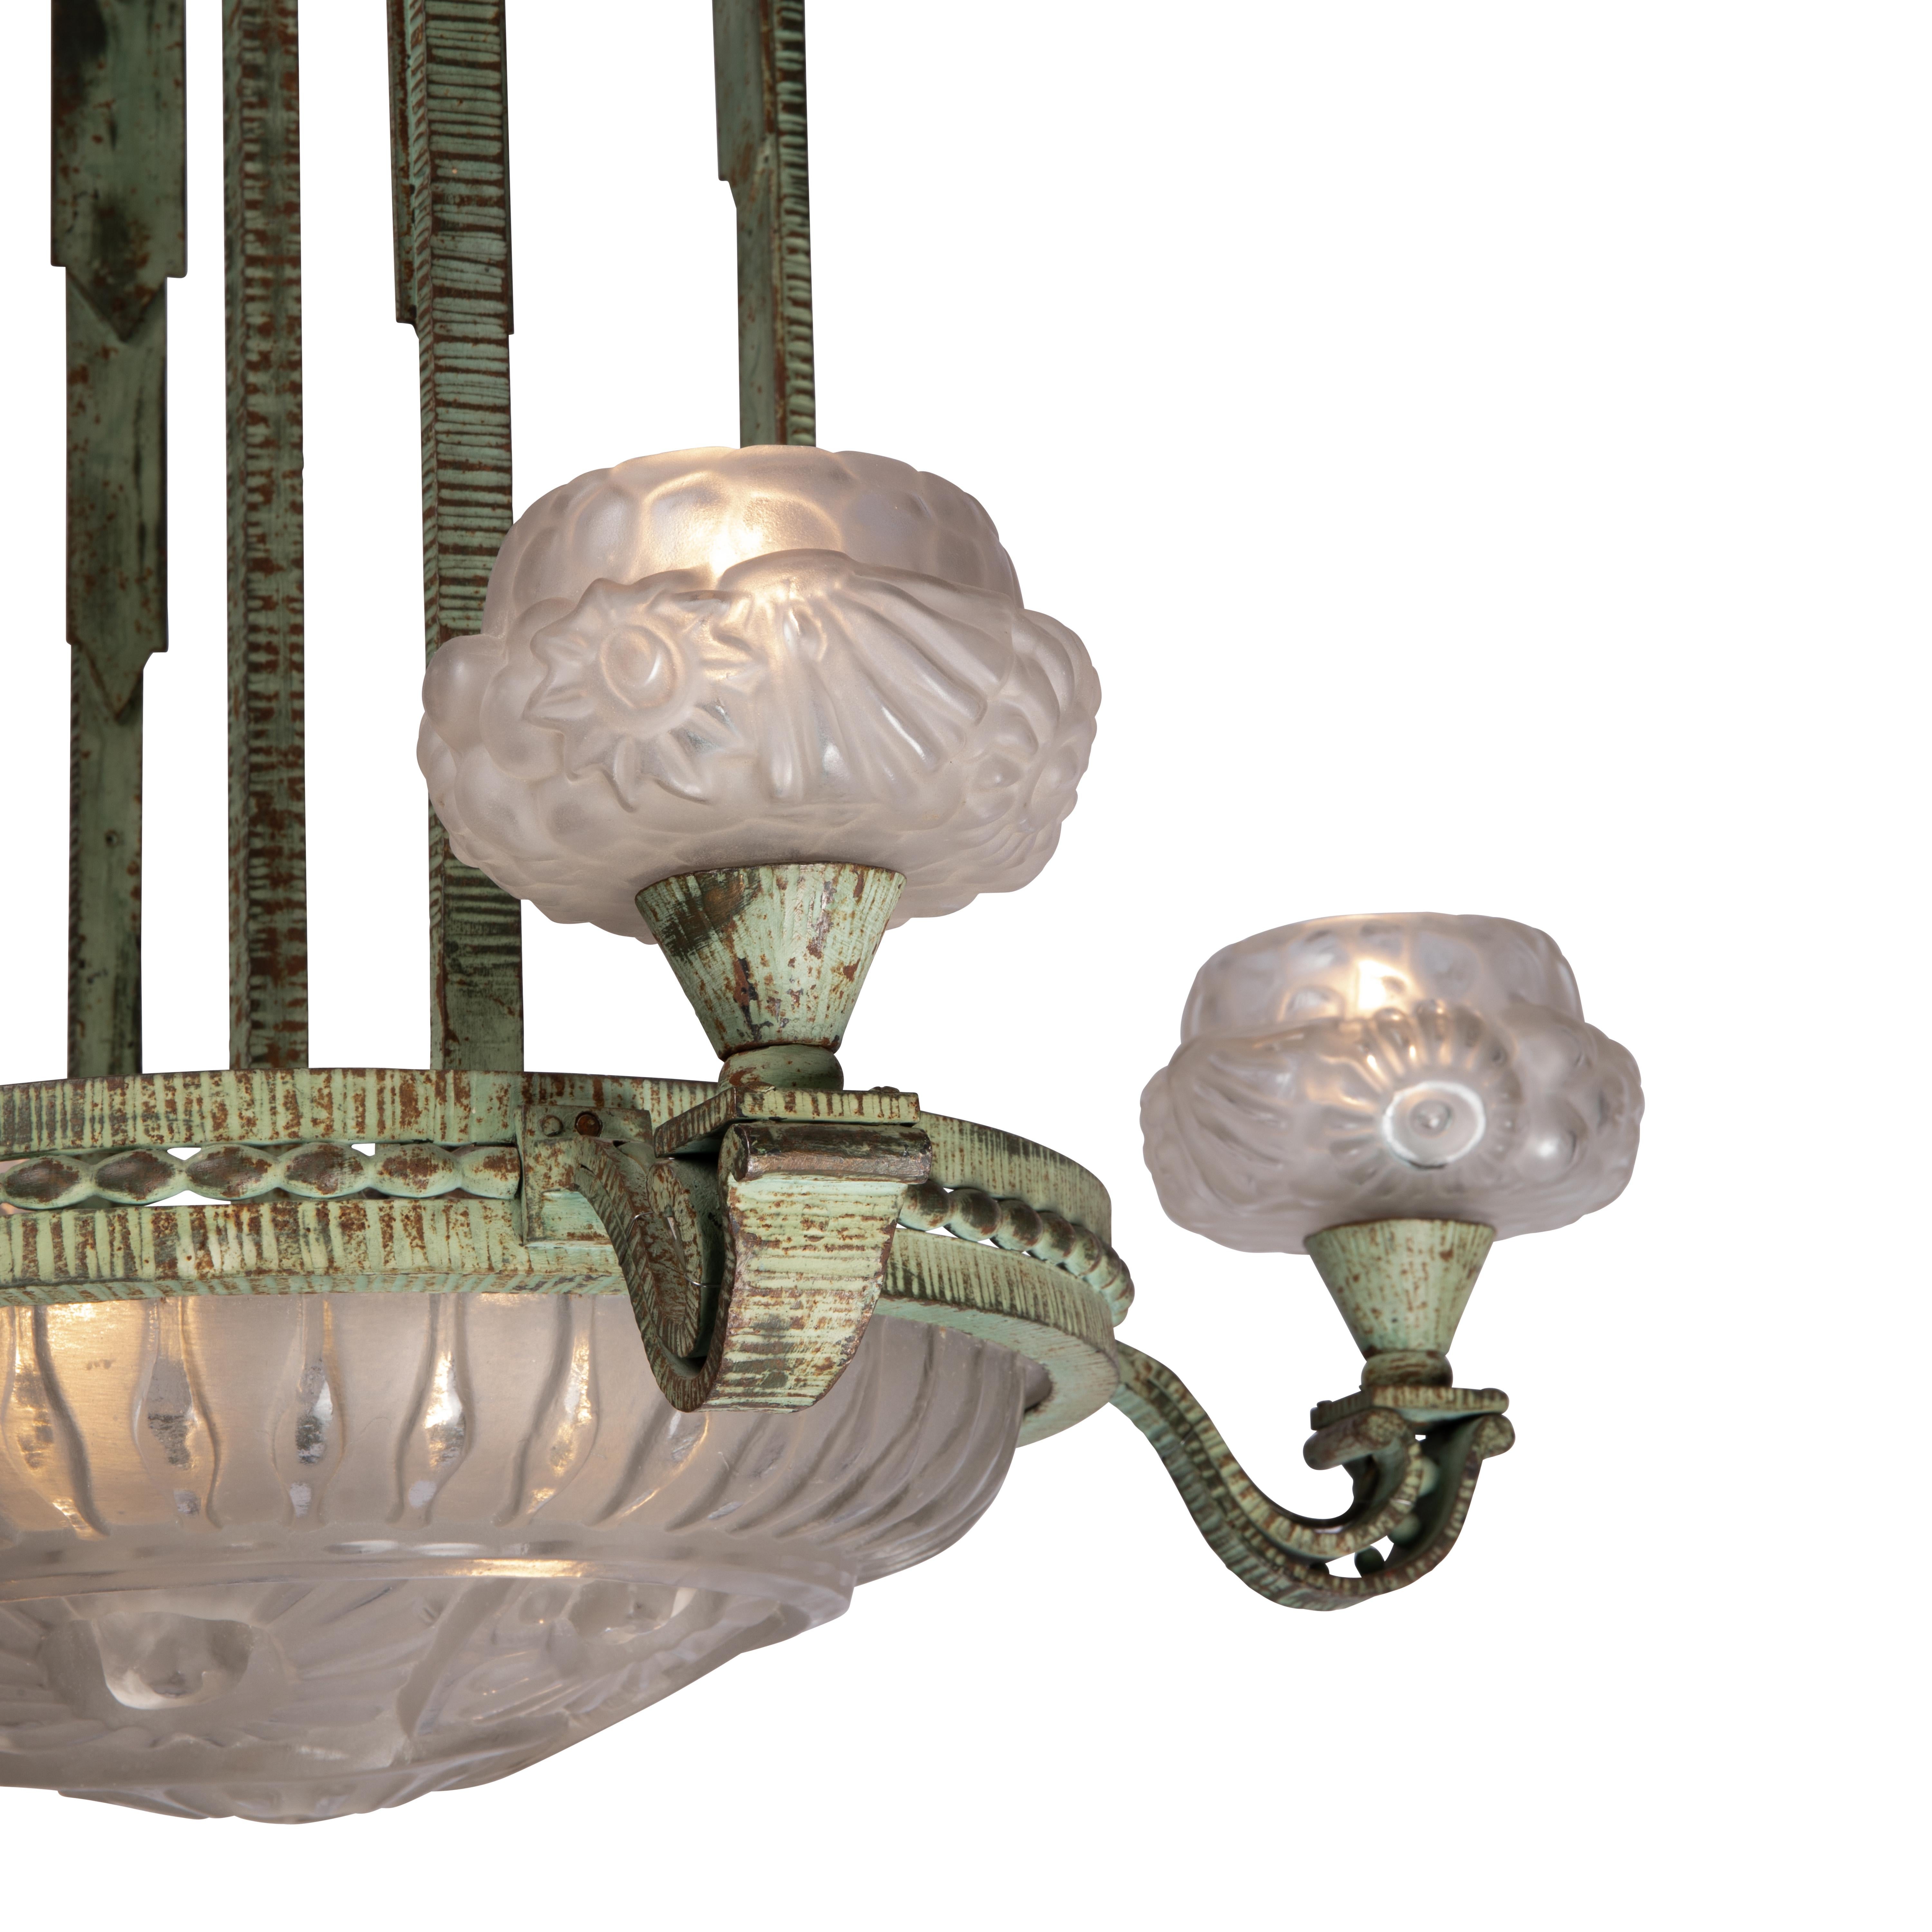 French Paul Kiss, Genet&Michon, Large Art Deco Chandelier, Cast Iron, Molded Glass 1925 For Sale